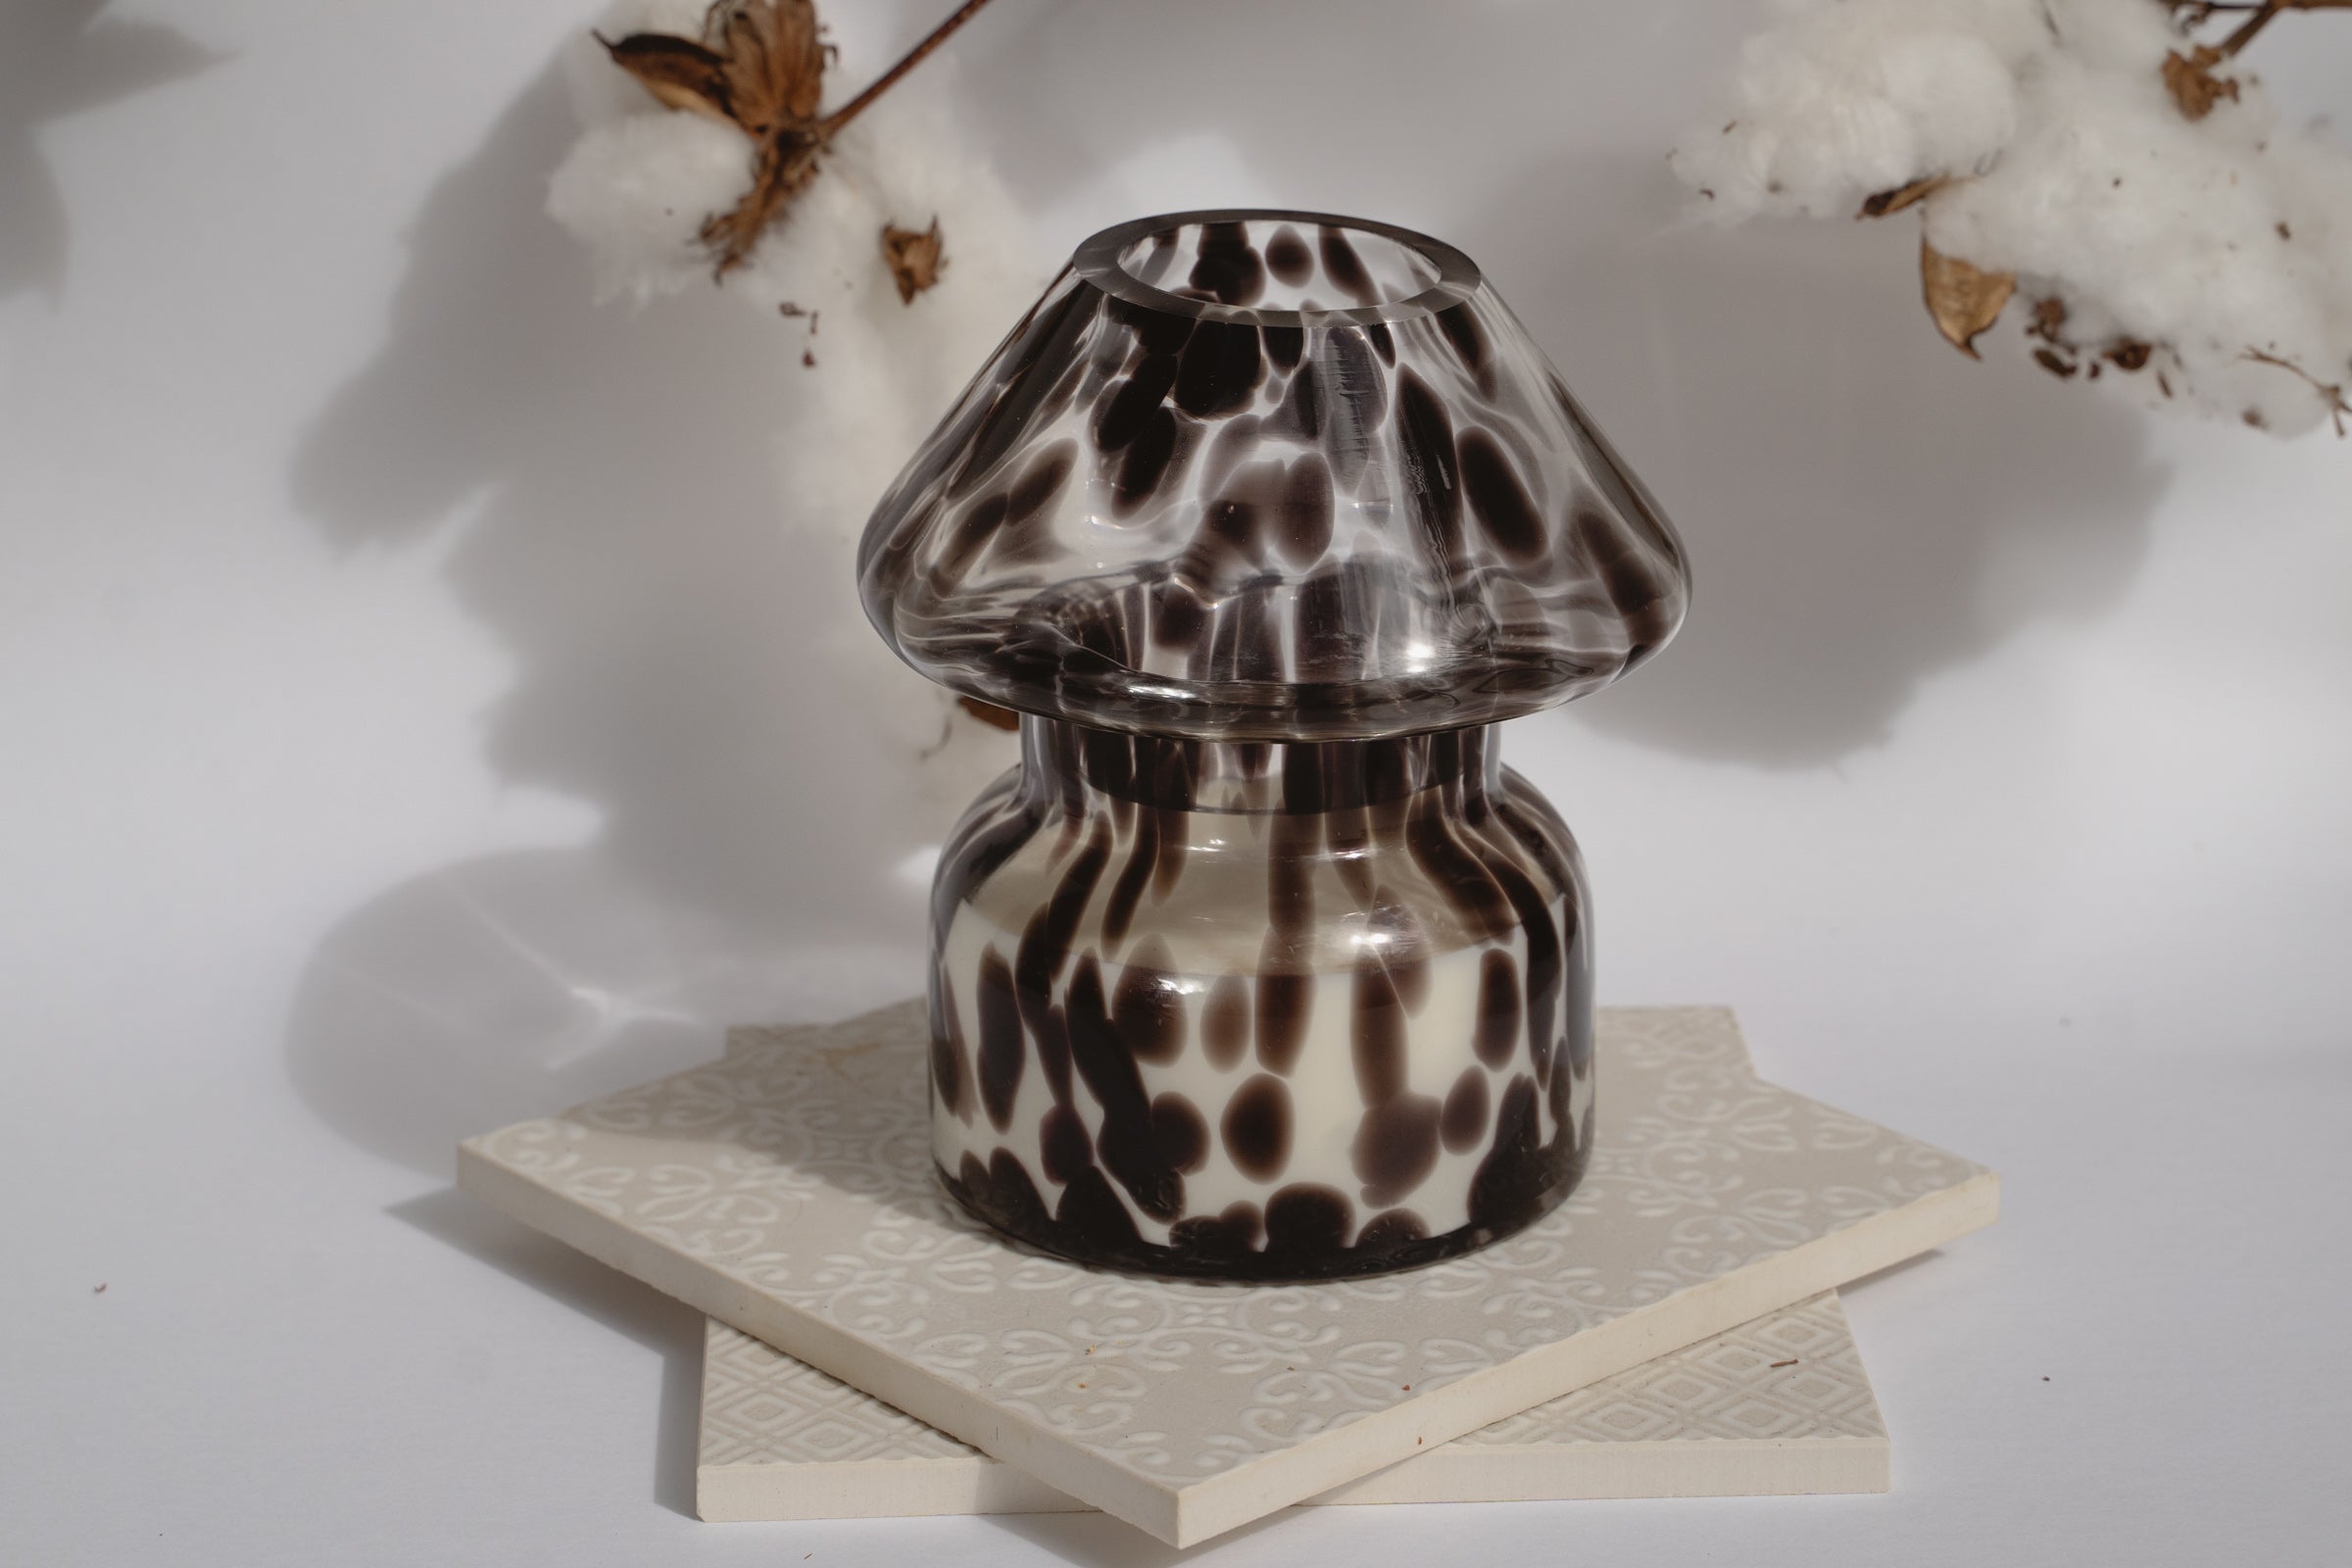 Dalmation spotted black glass mushroom candle lamp. Candle lamp is sitting on tile with cotton in the background 